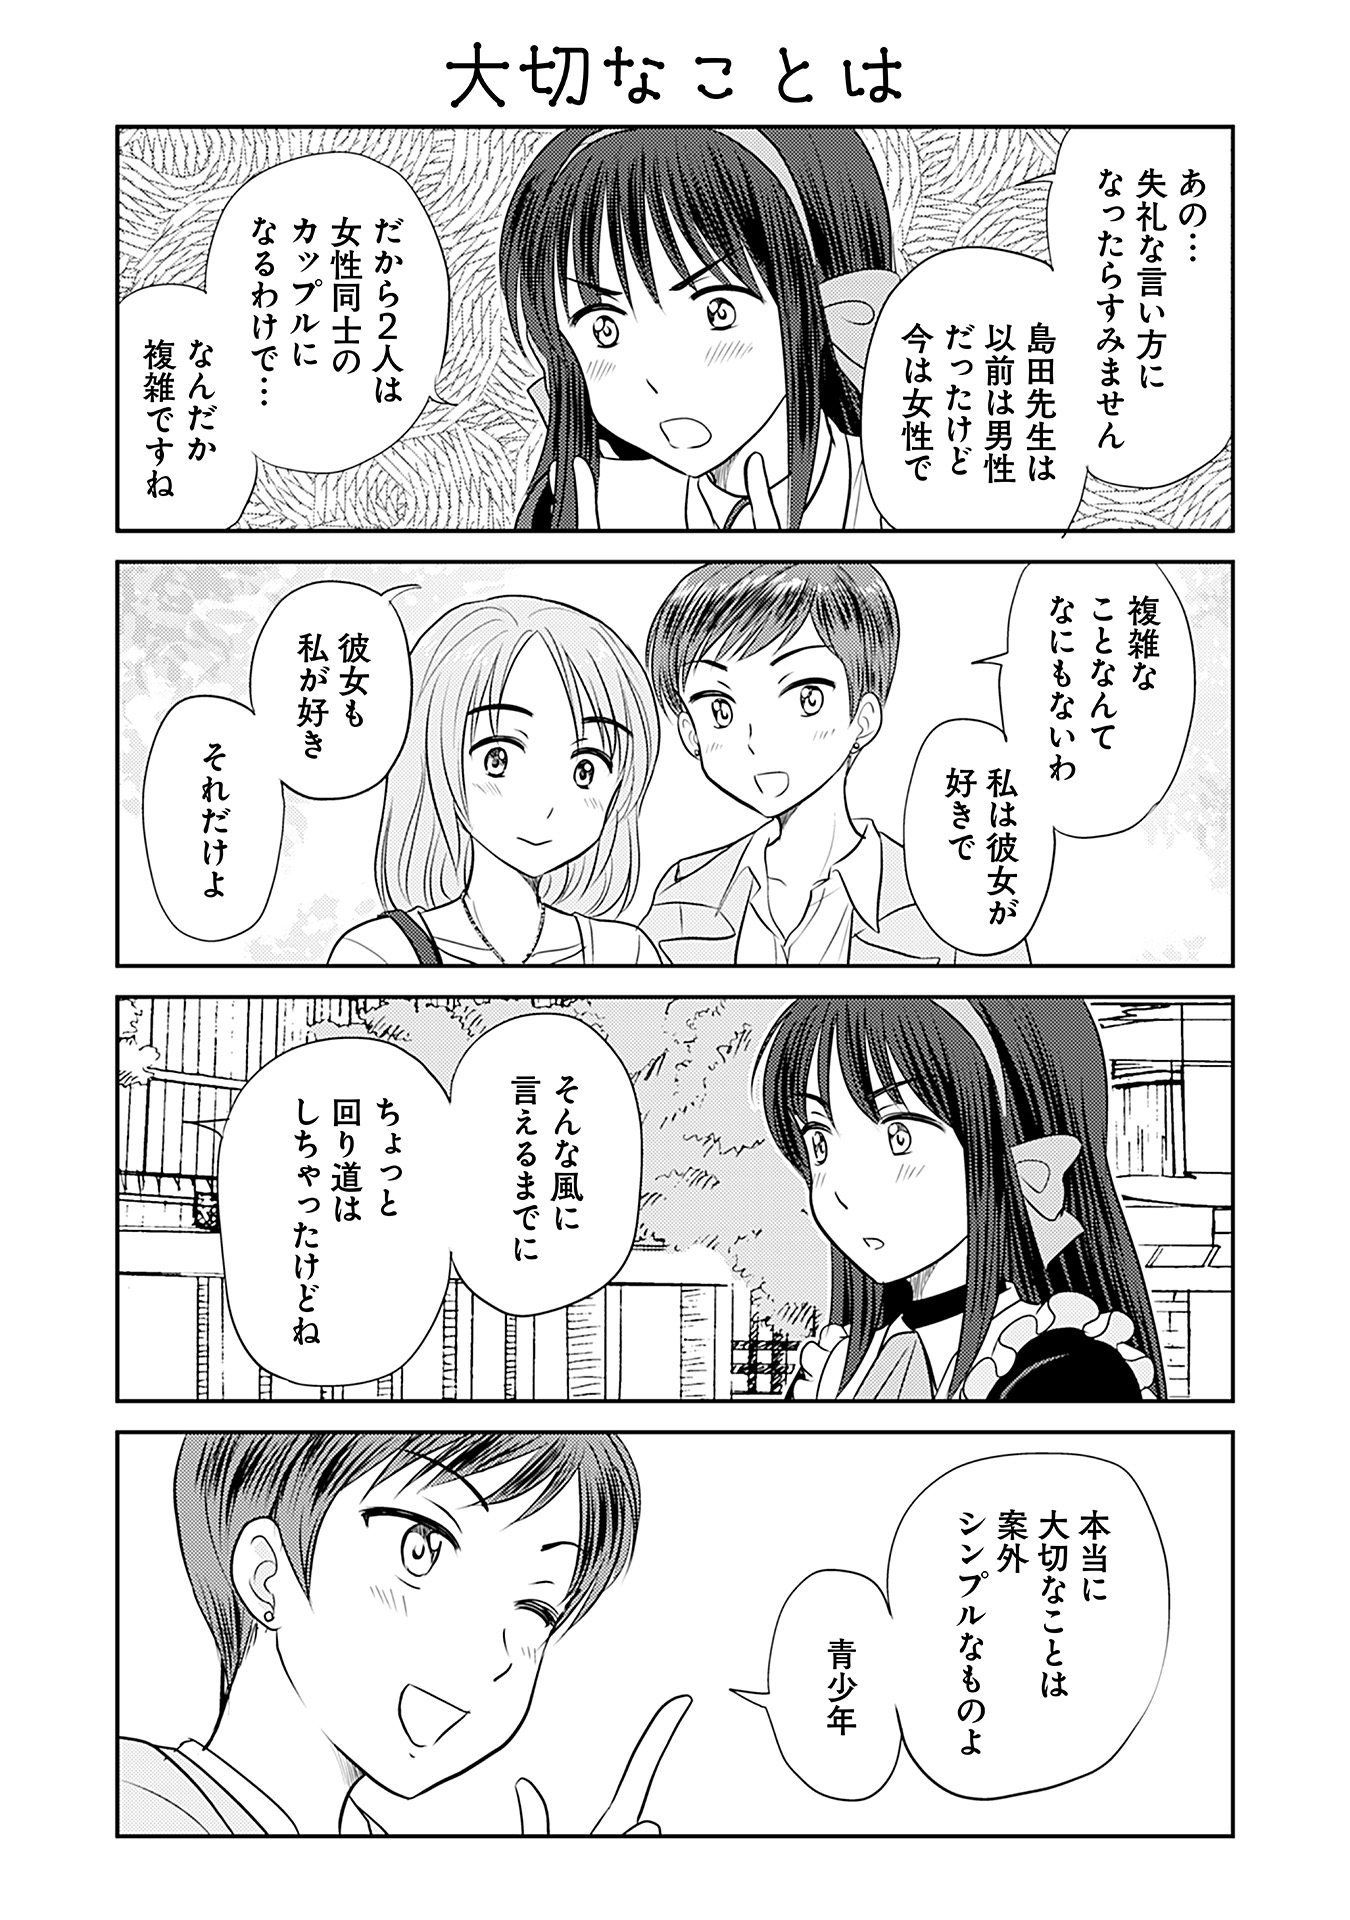 A lesbian couple explains their relationship to one of the main characters, Kei.